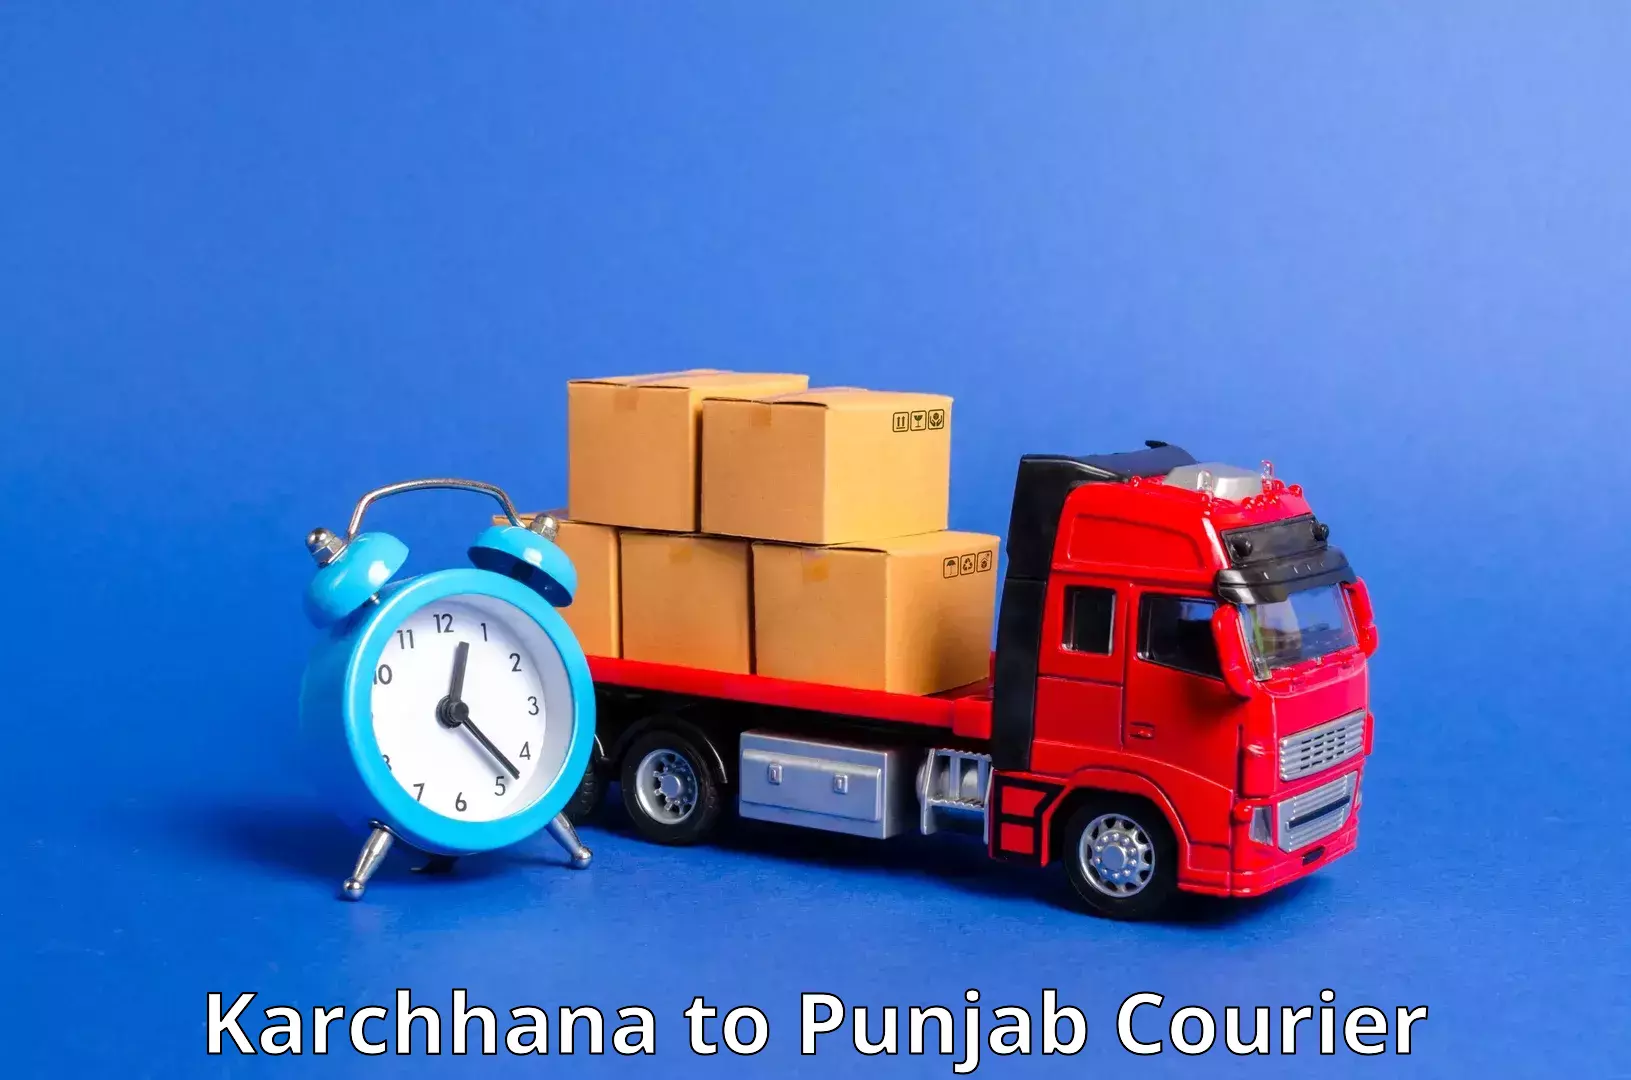 End-to-end delivery Karchhana to Punjab